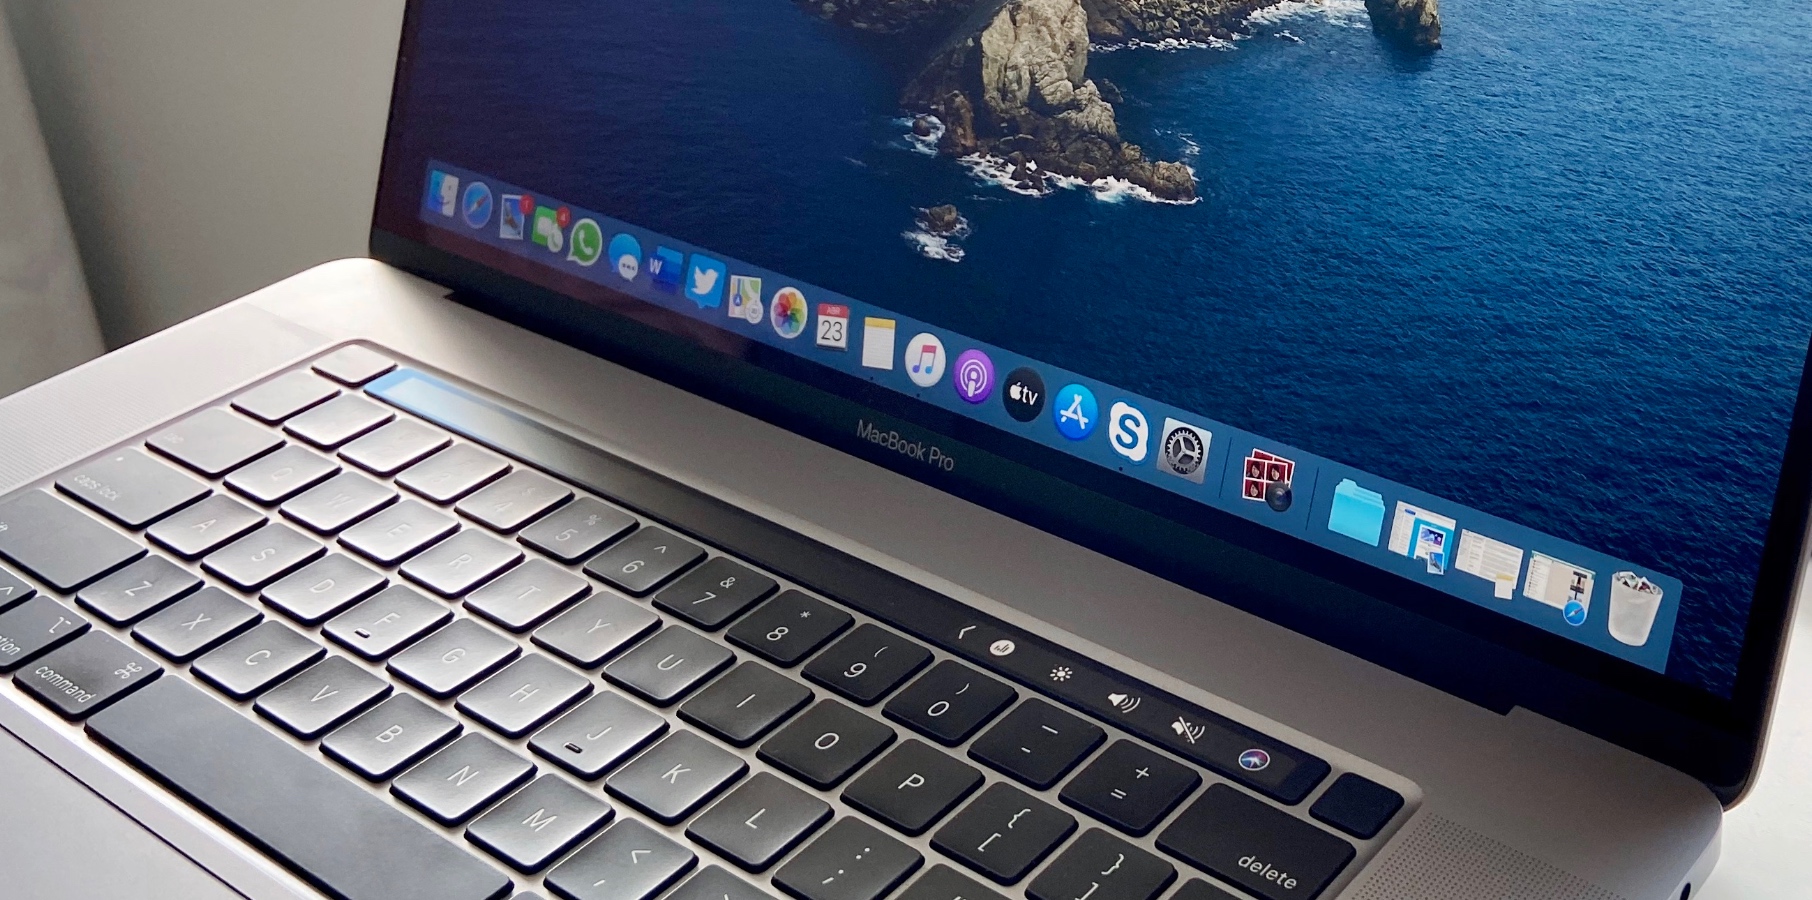 Apple MacBook Pro (13-inch, 2017) review: Apple's non-Touch Bar